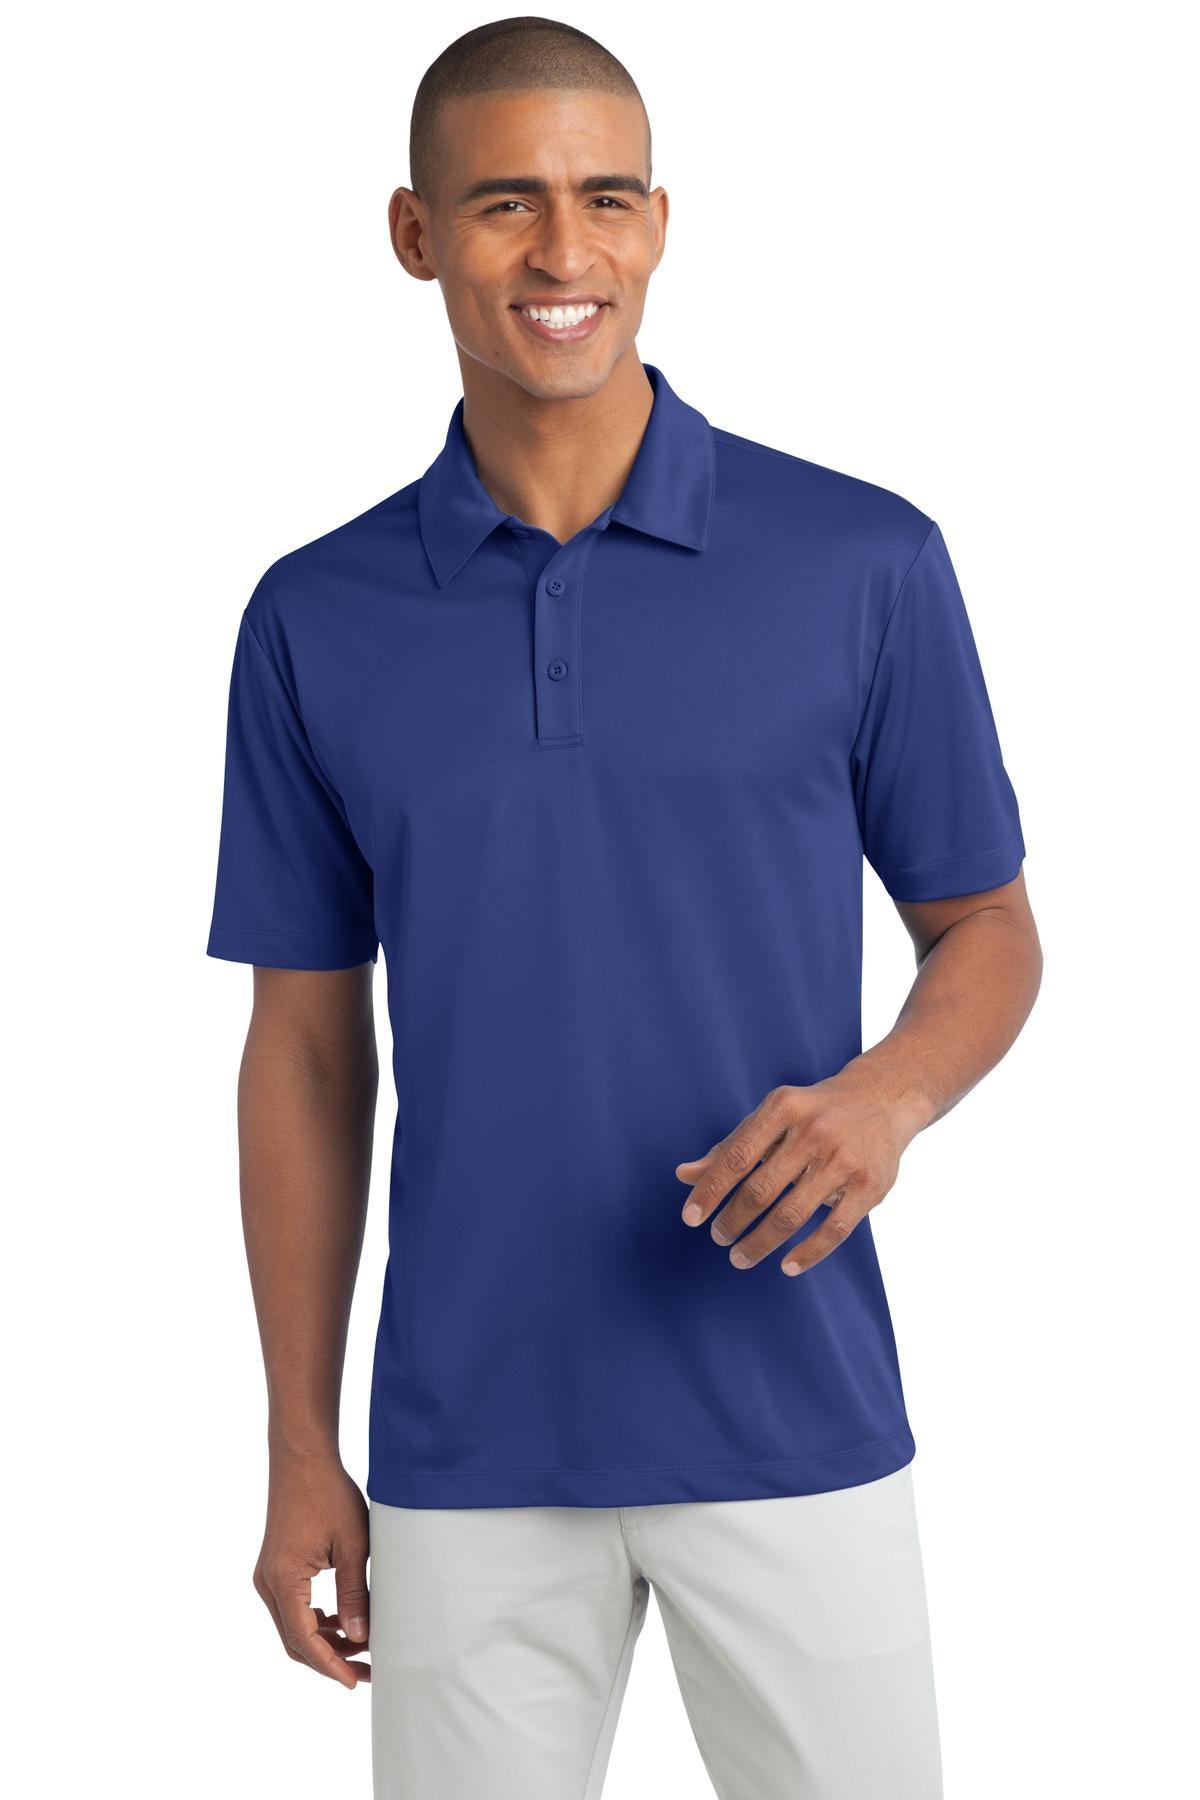 Port Authority Tall Silk Touch Performance Polo. TLK540 - Dresses Max